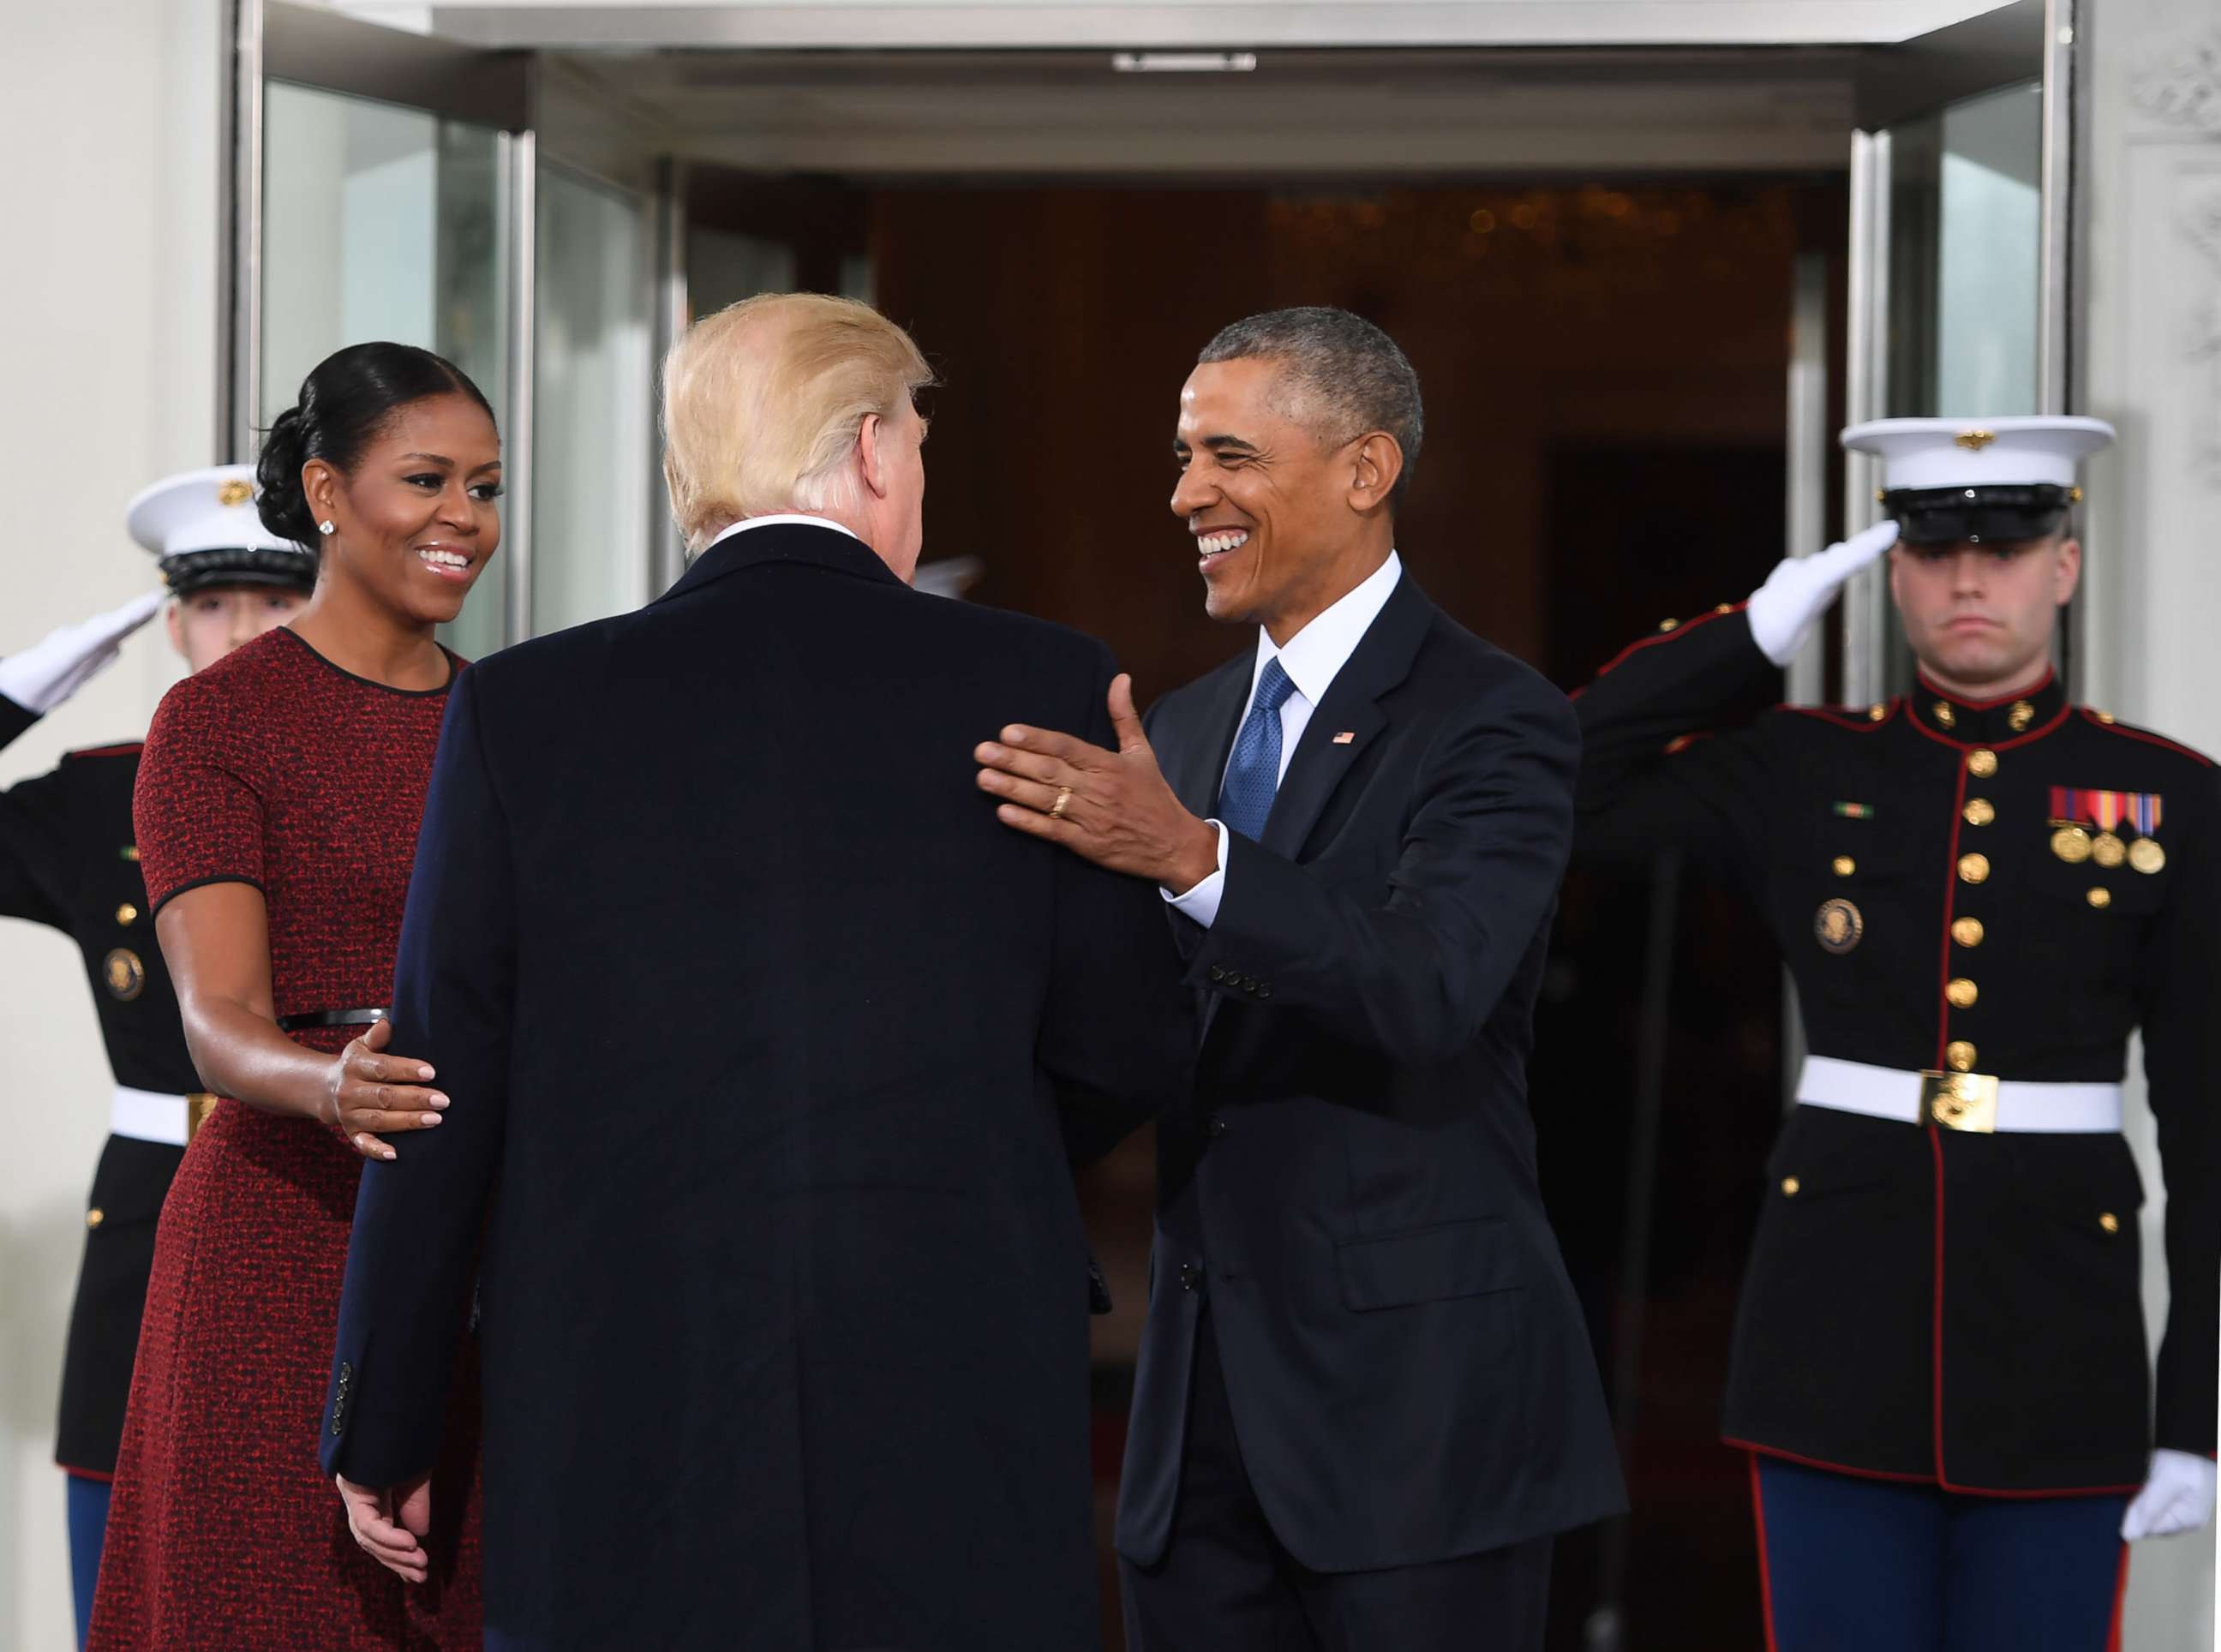 PHOTO: President-elect Donald Trump is greeted by President Barack Obama and first lady Michelle Obama as he arrives at the White House, Jan. 20, 2017.